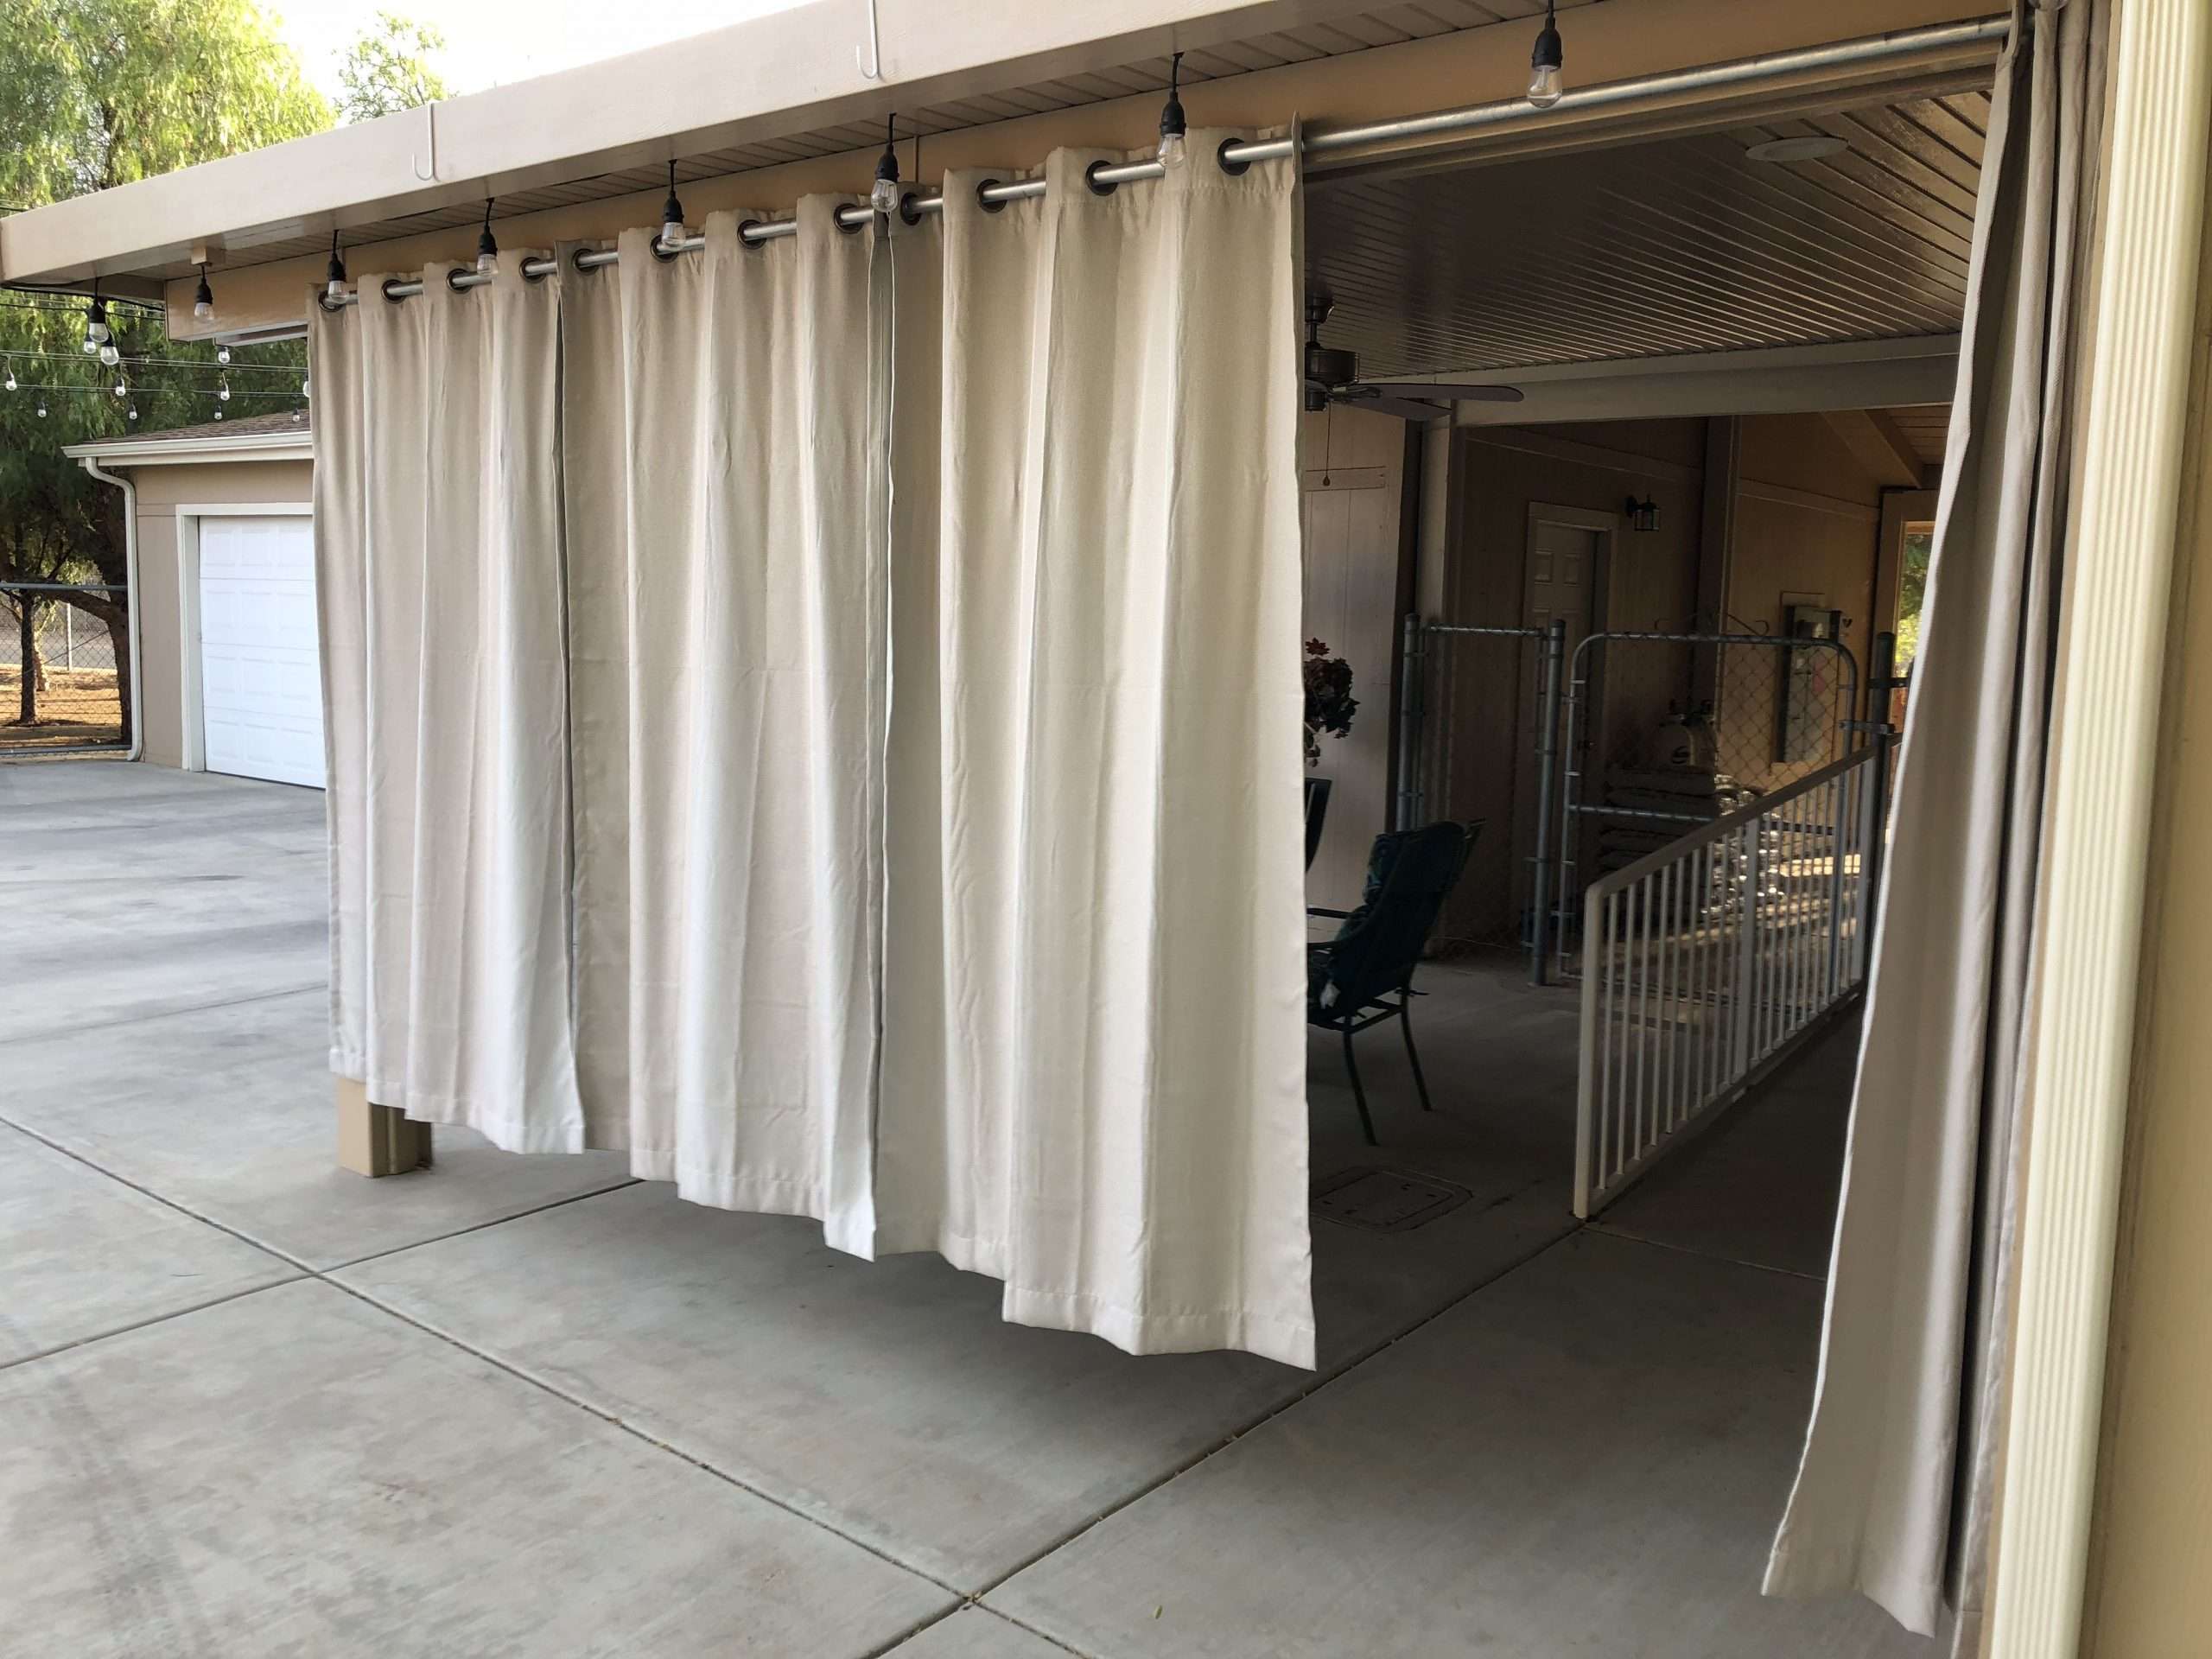 Hang Drapes on your Alumawood Patio Cover.